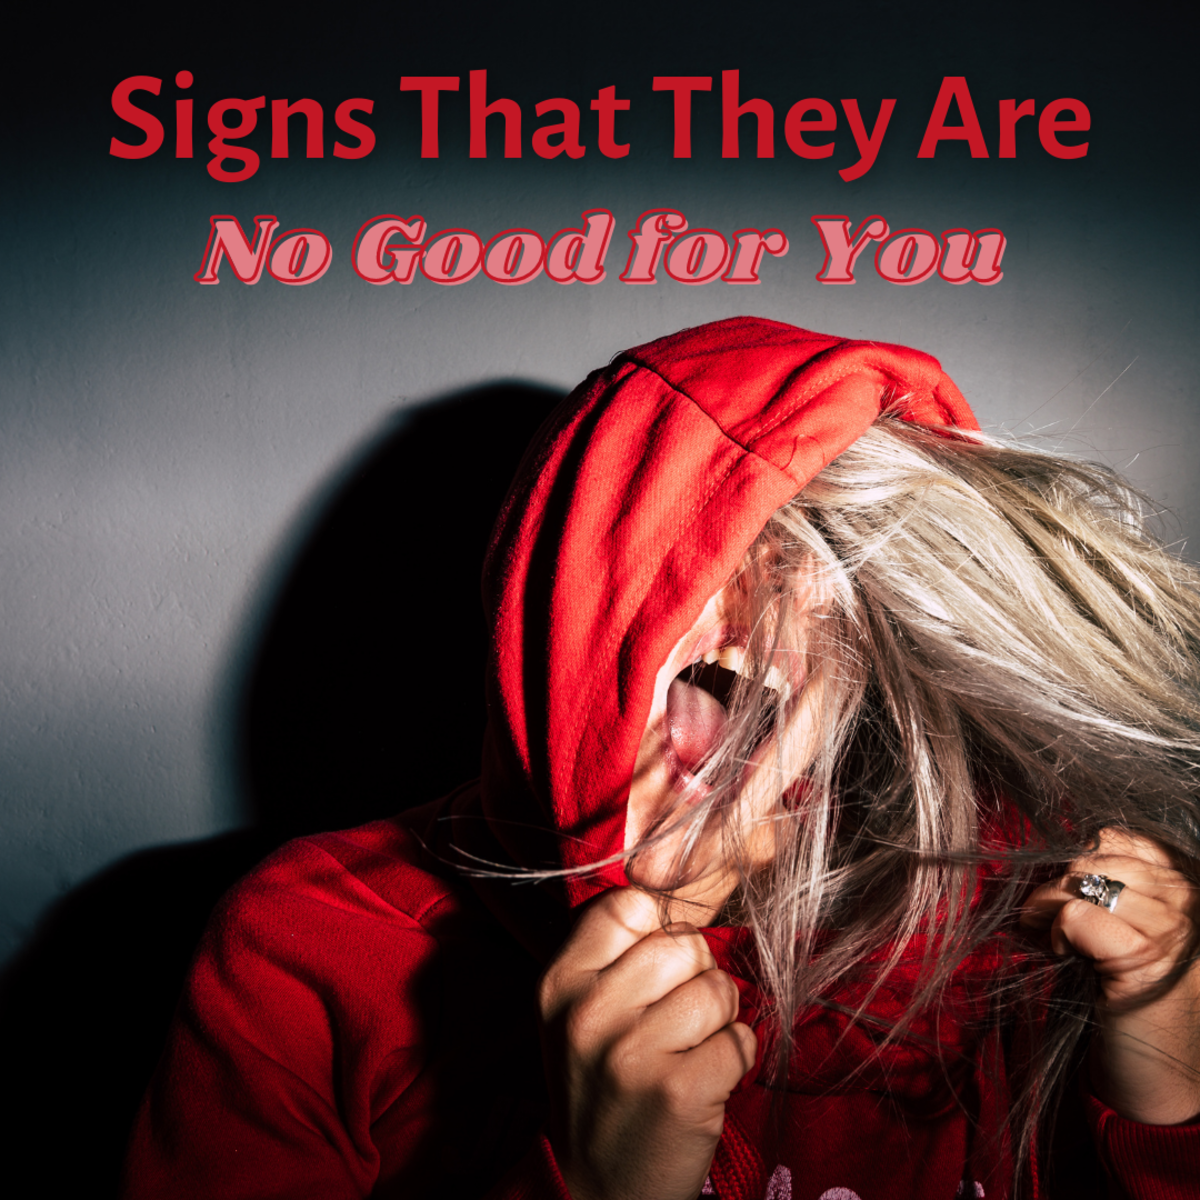 Signs that he or she is no good for you!